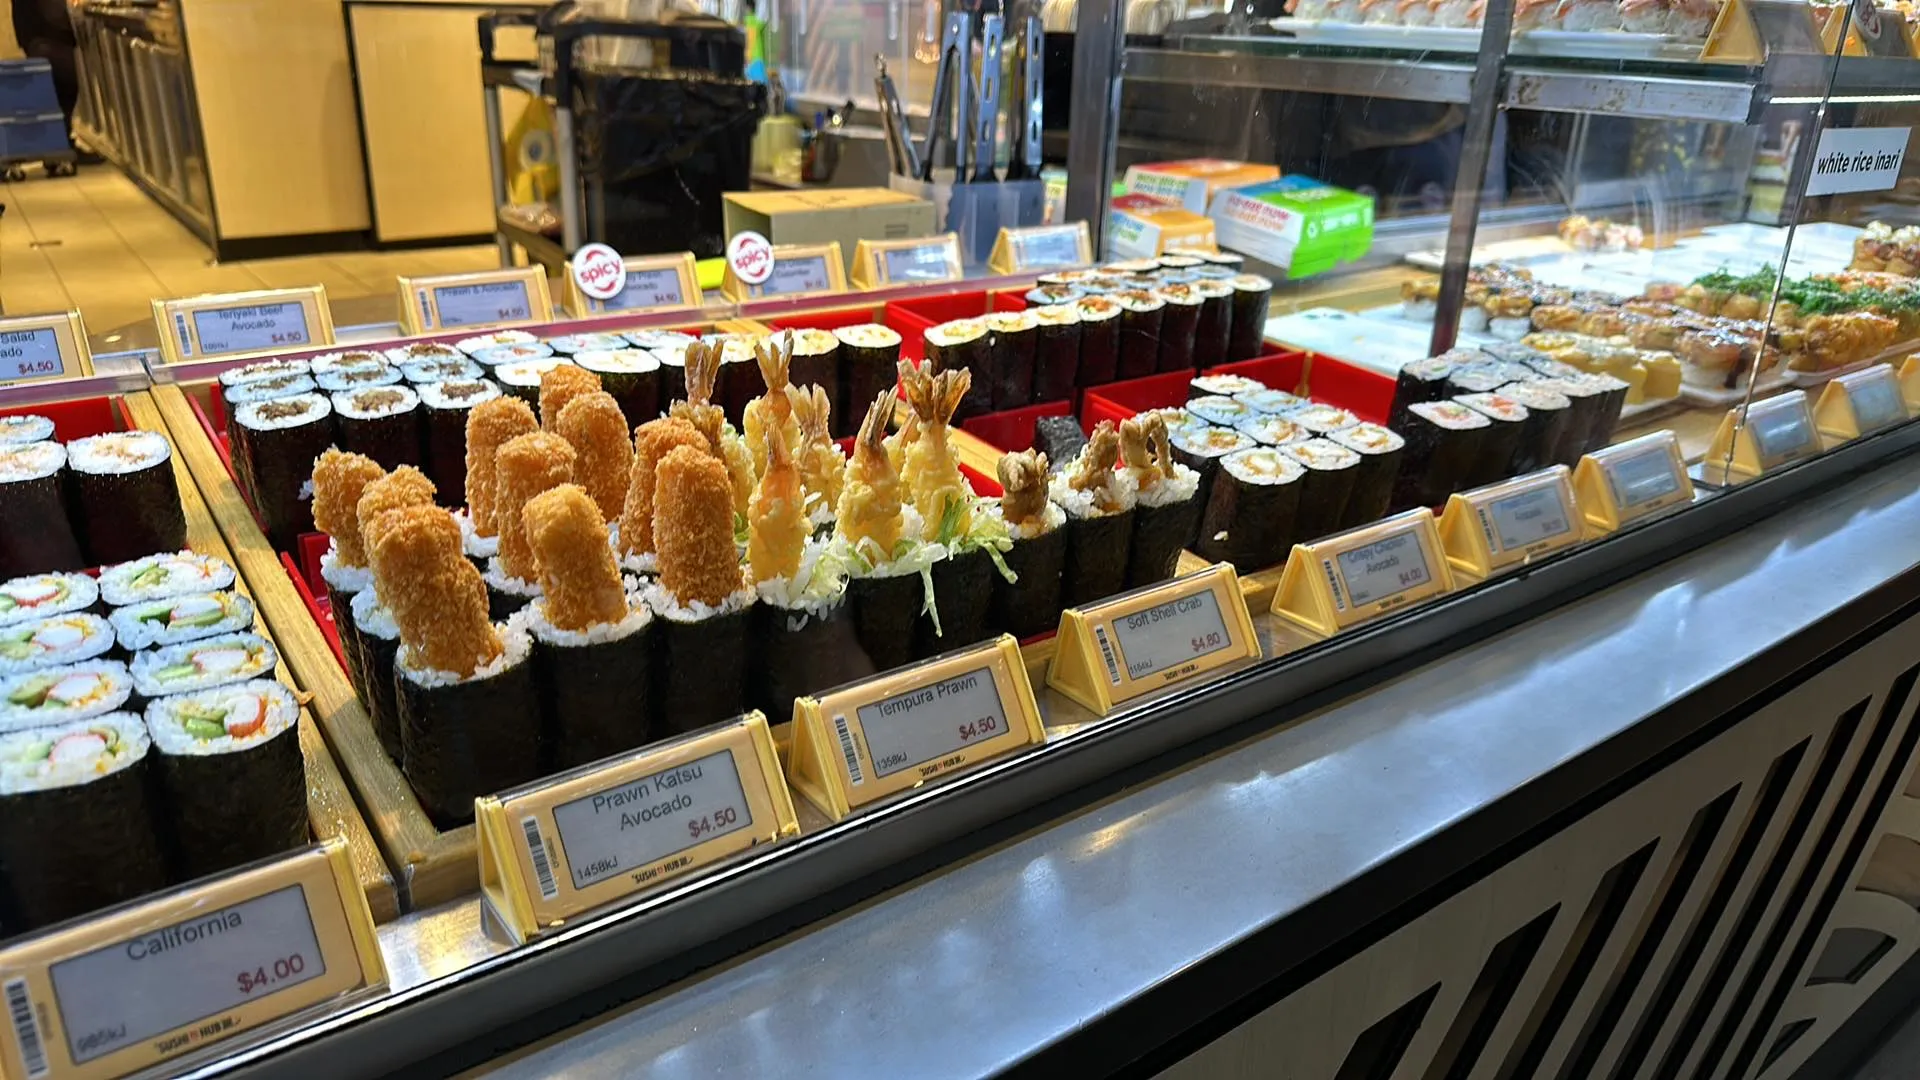 Another example of takeaway sushi